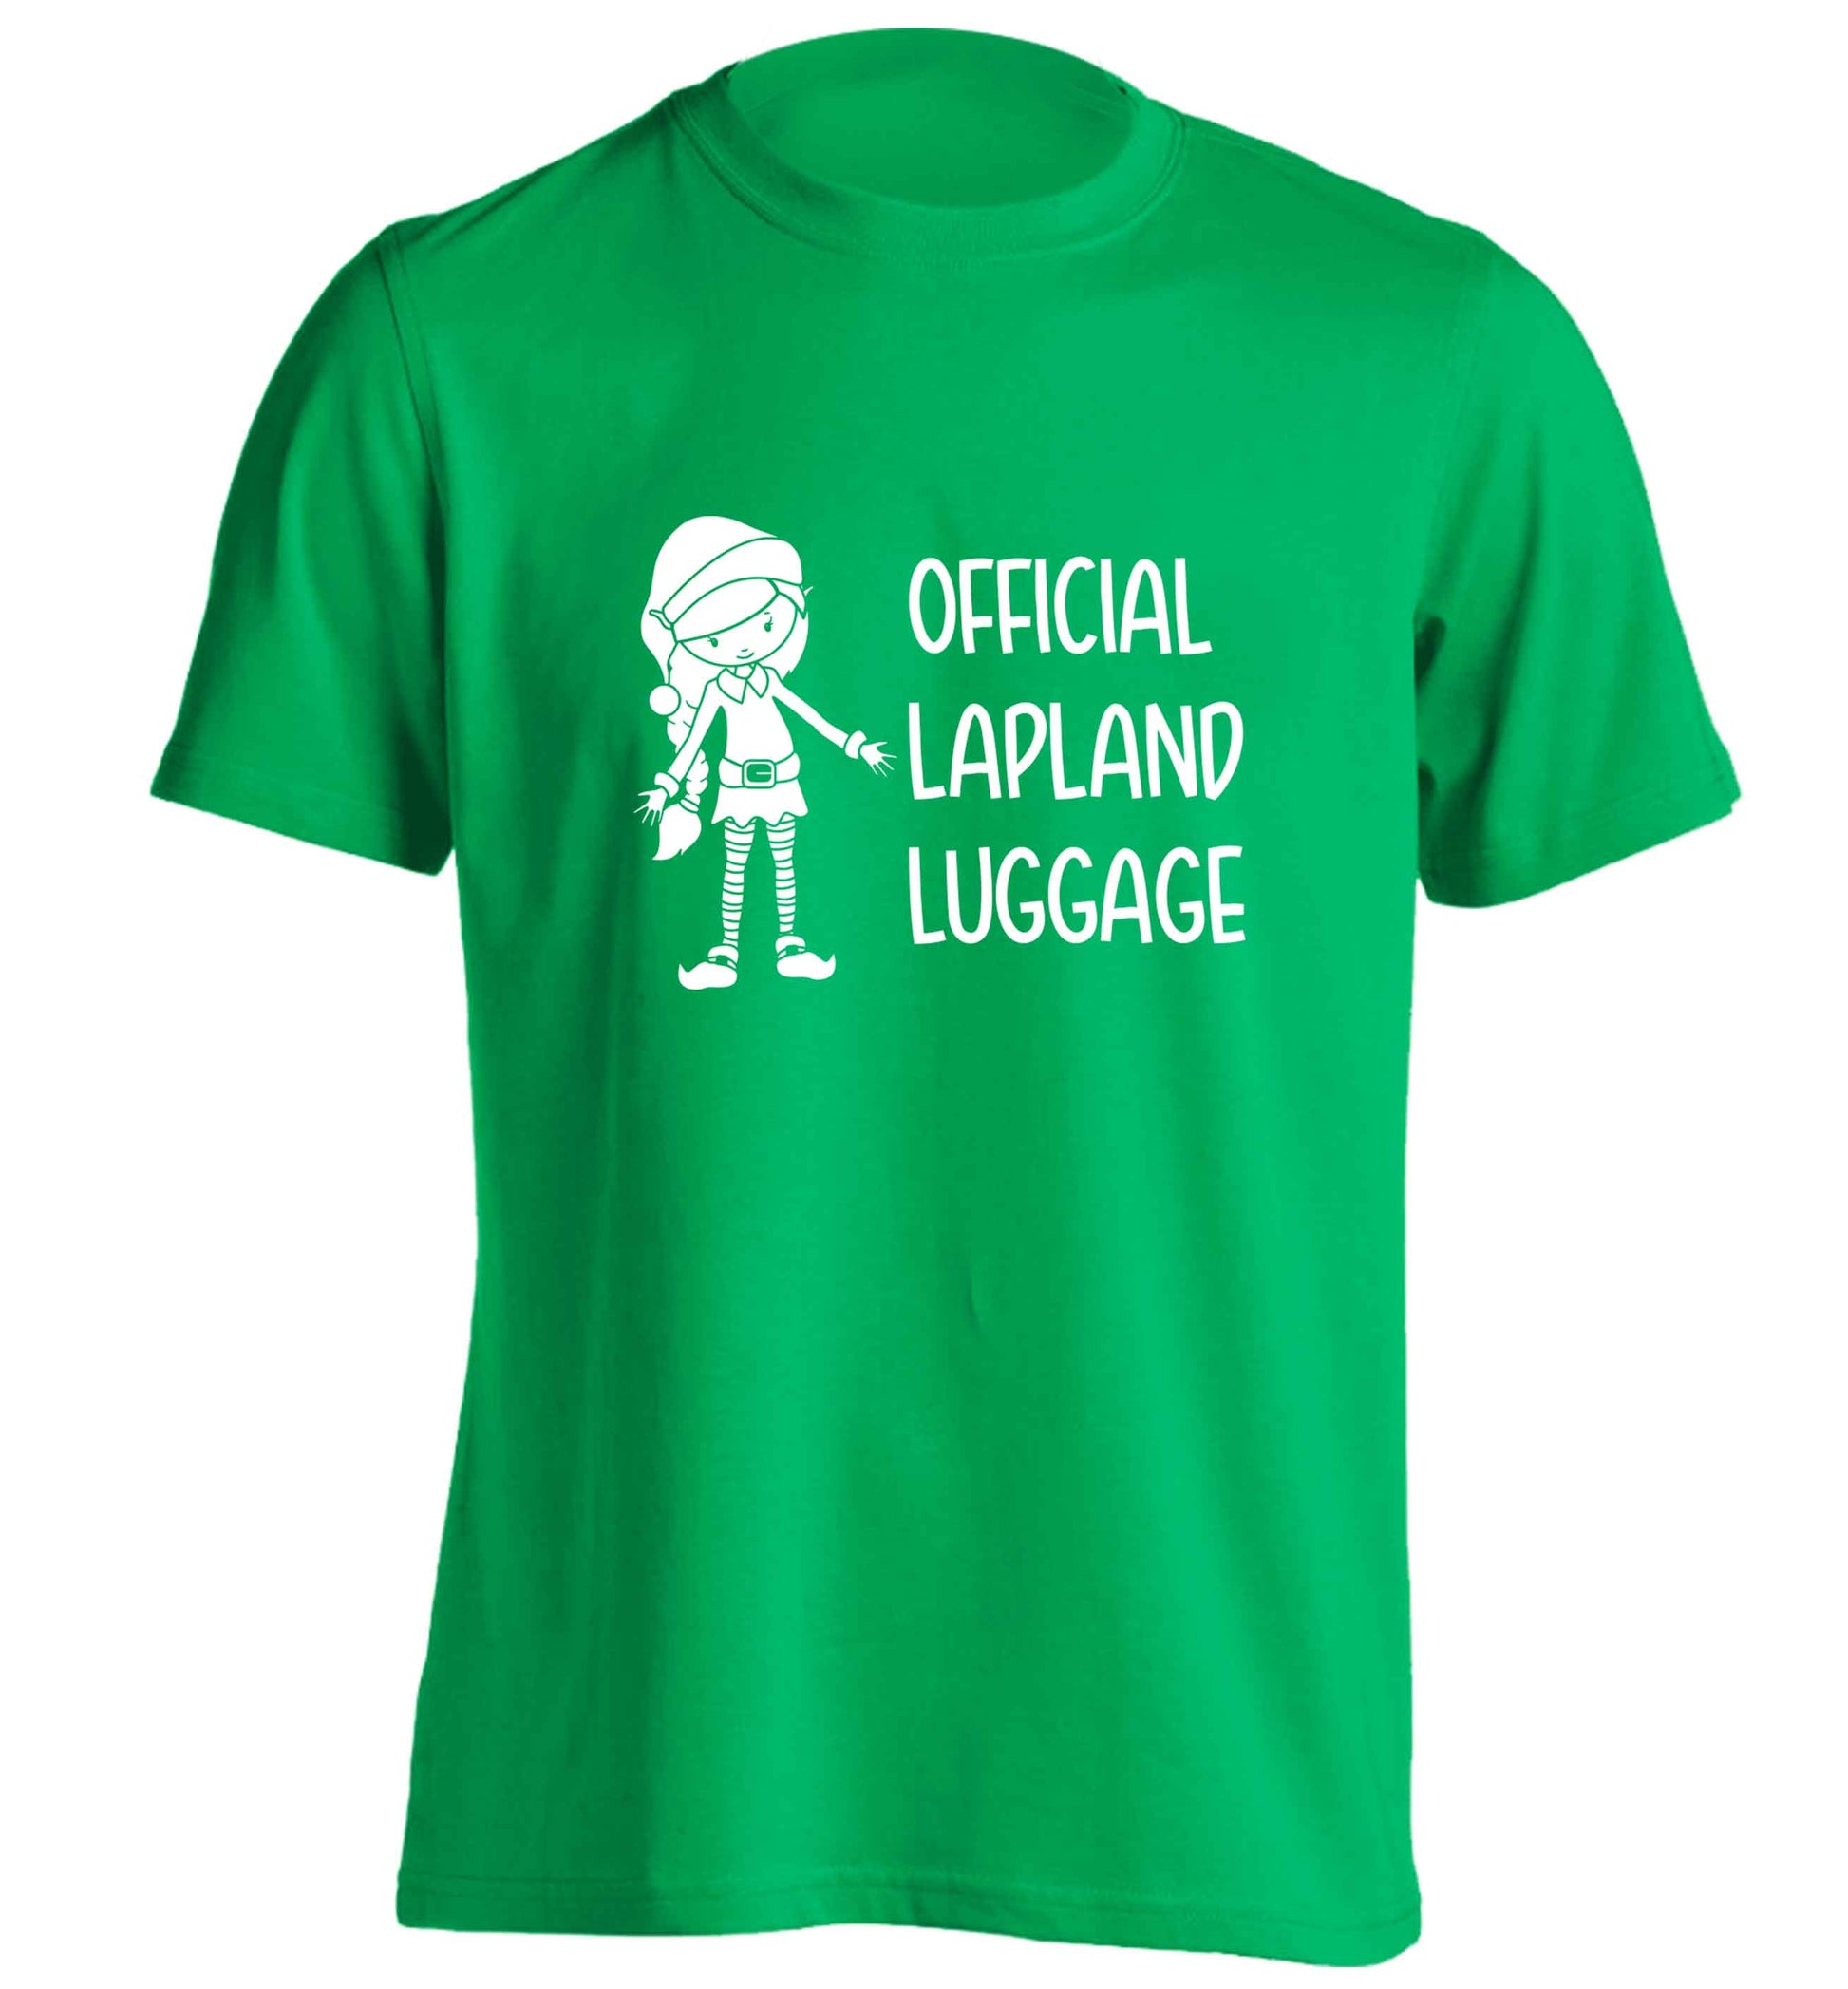 Official lapland luggage - Elf snowflake adults unisex green Tshirt 2XL